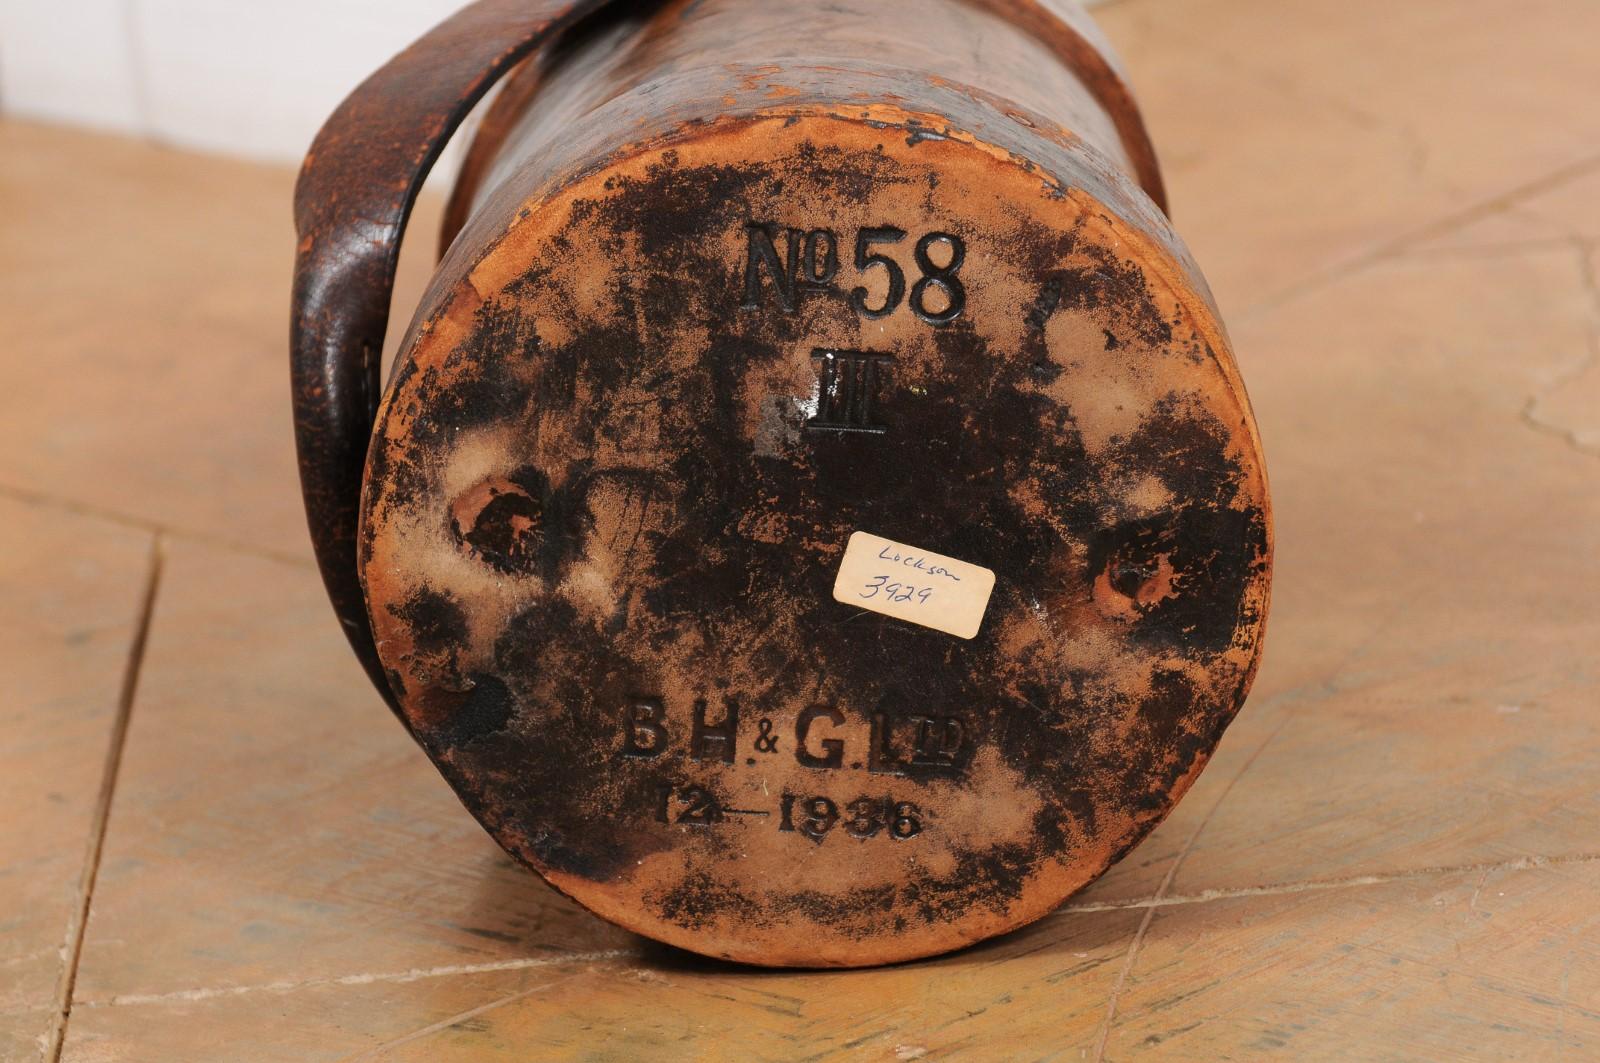 British Royal Navy Leather Cordite Bucket with BH & G Ltd Stamp on the Underside 11